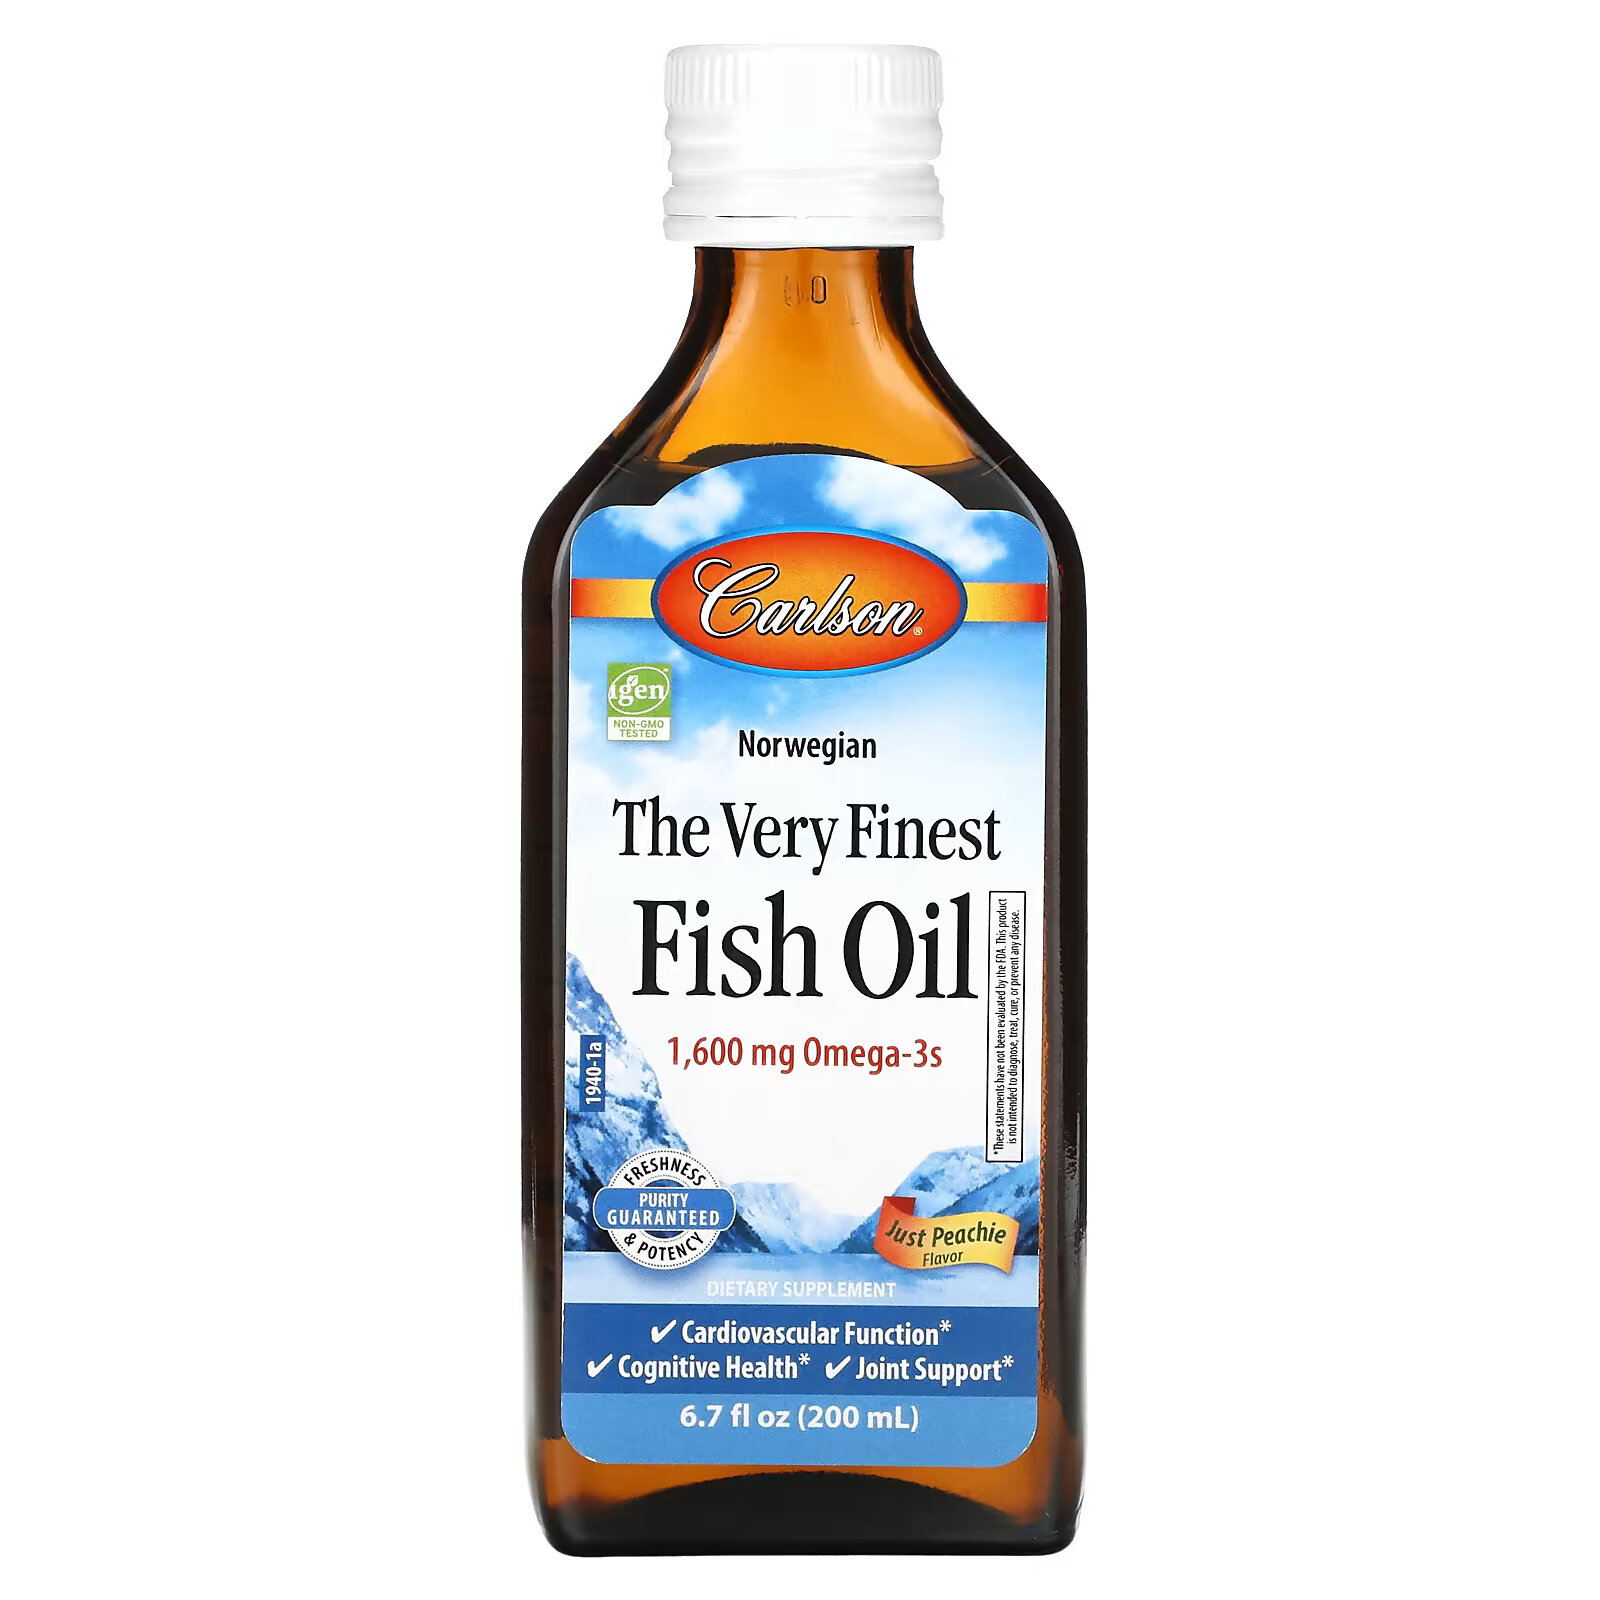 Carlson, The Very Finest Fish Oil, Just Peachie, 1,600 mg, 6.7 fl oz (200 ml) carlson norwegian the very finest fish oil natural mixed berry 1 600 mg 6 7 fl oz 200 ml